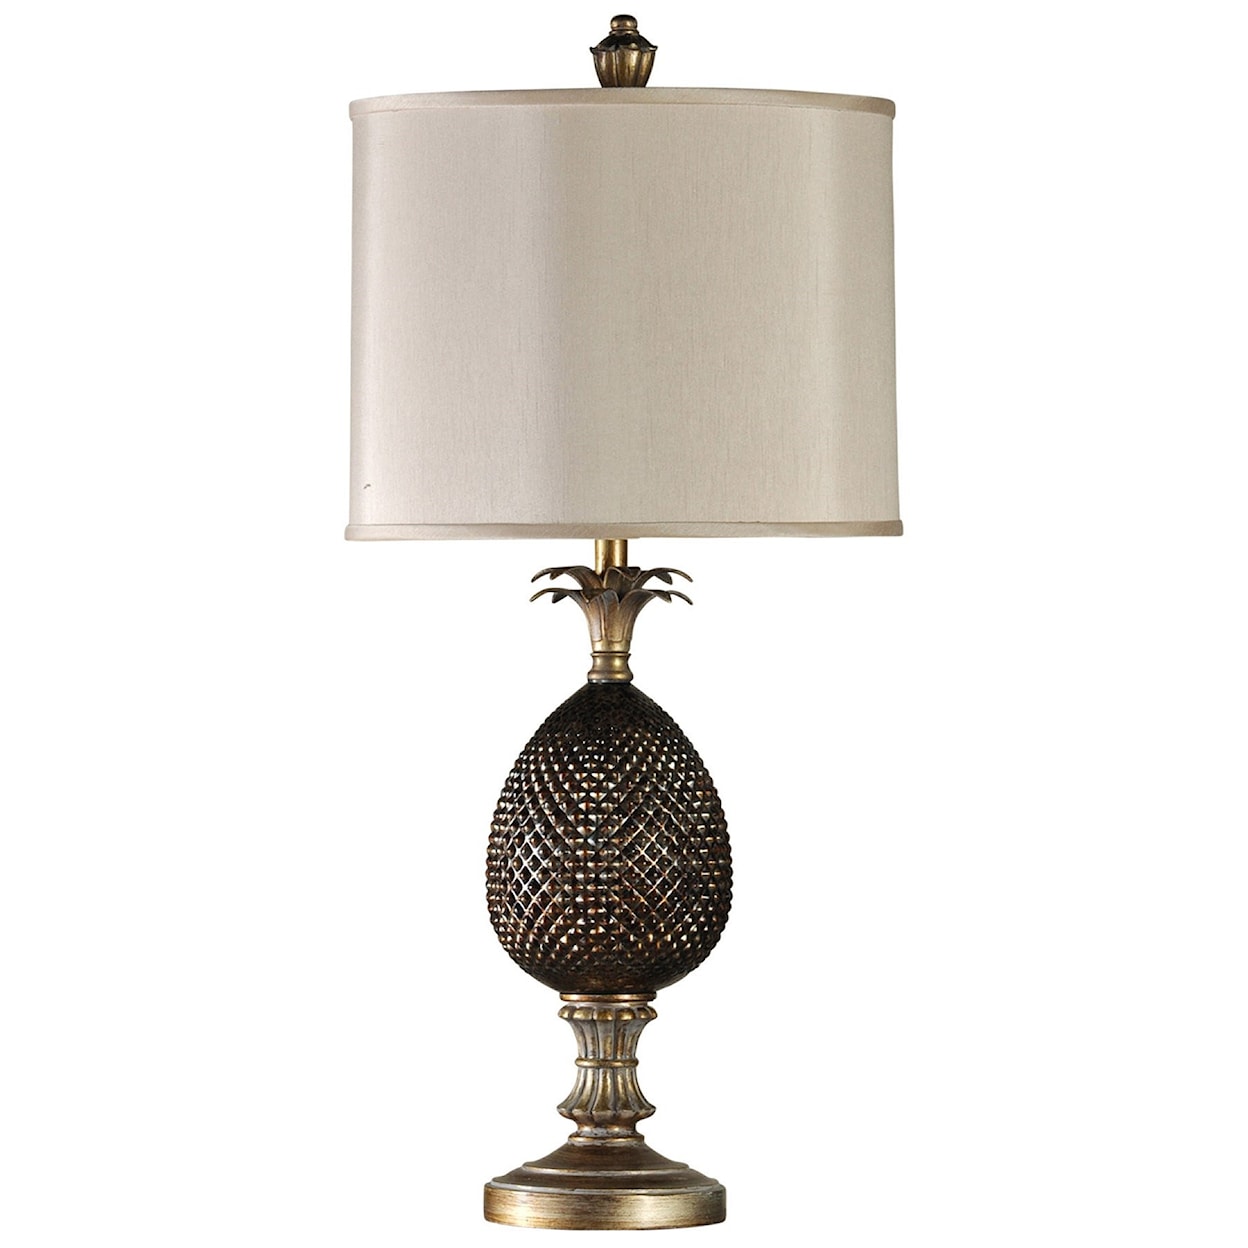 StyleCraft Lamps Traditional Pineapple Body Lamp